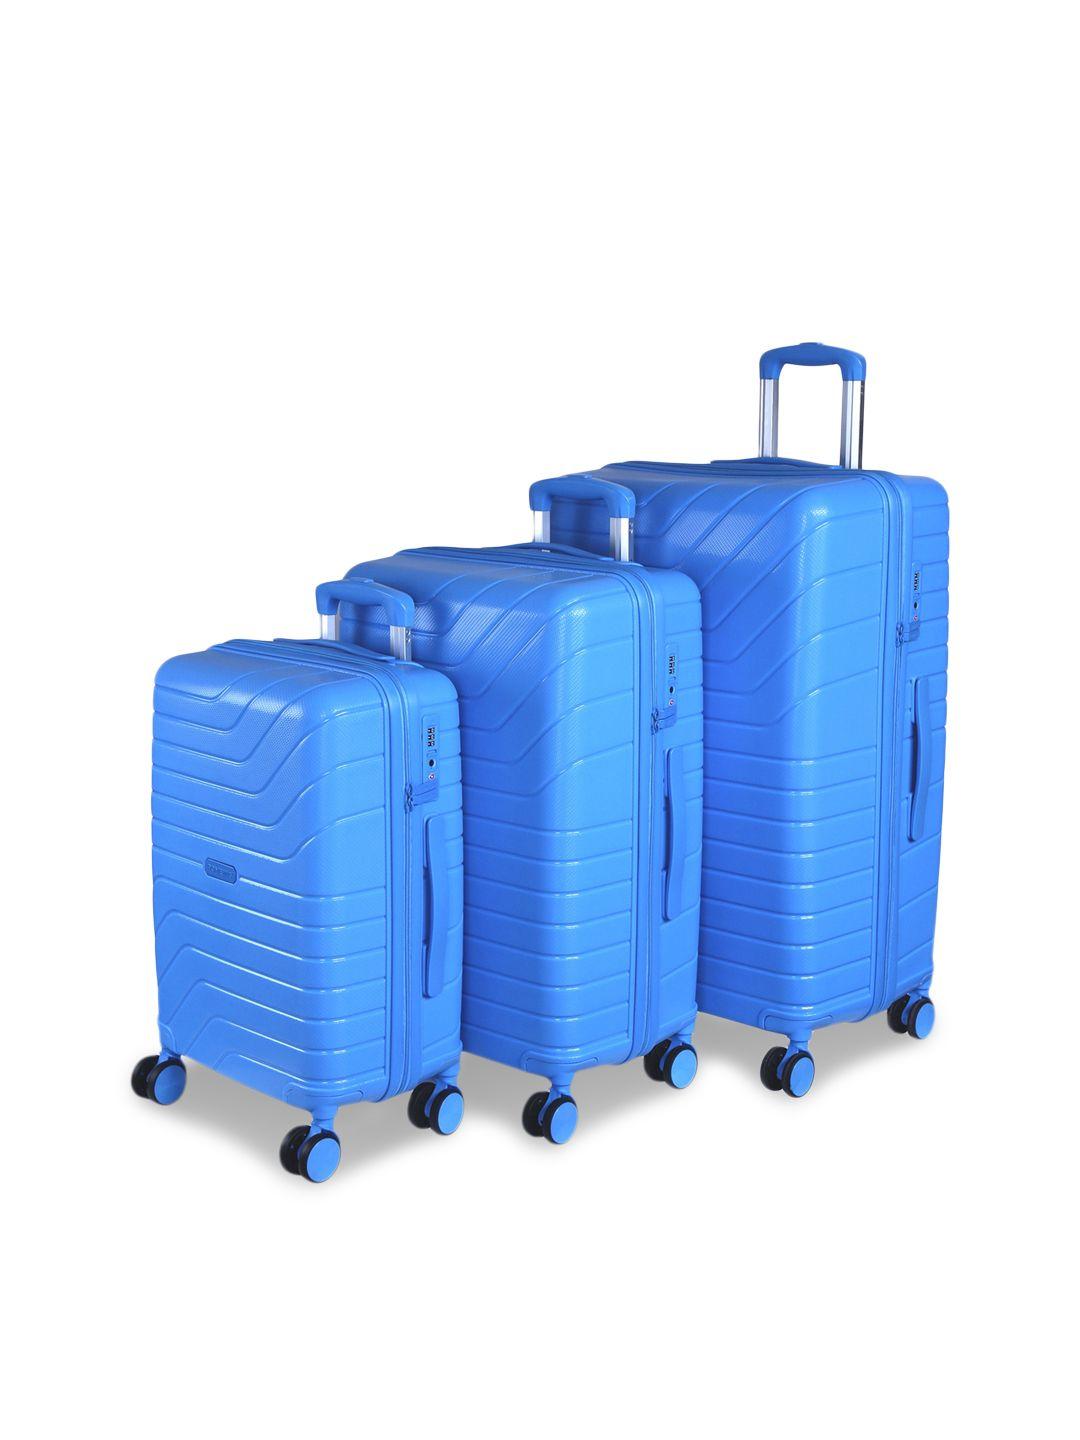 romeing tuscany set of 3 sky blue textured polypropylene hard-sided trolley suitcases